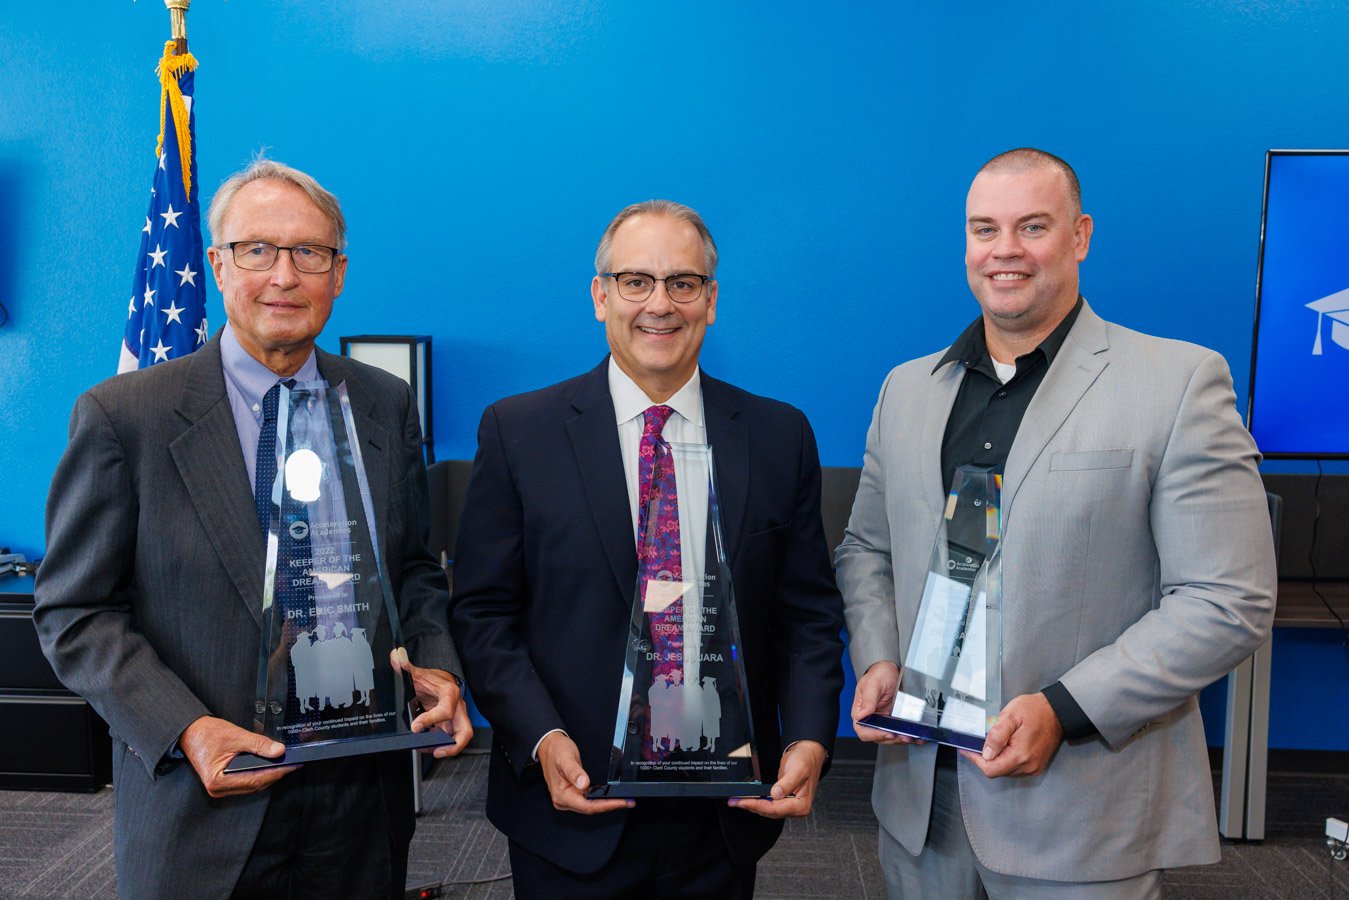 From left, Dr. Eric Smith, Dr. Jesus F. Jara and CCSD Adult Education Director Eric Gant display their awards. 